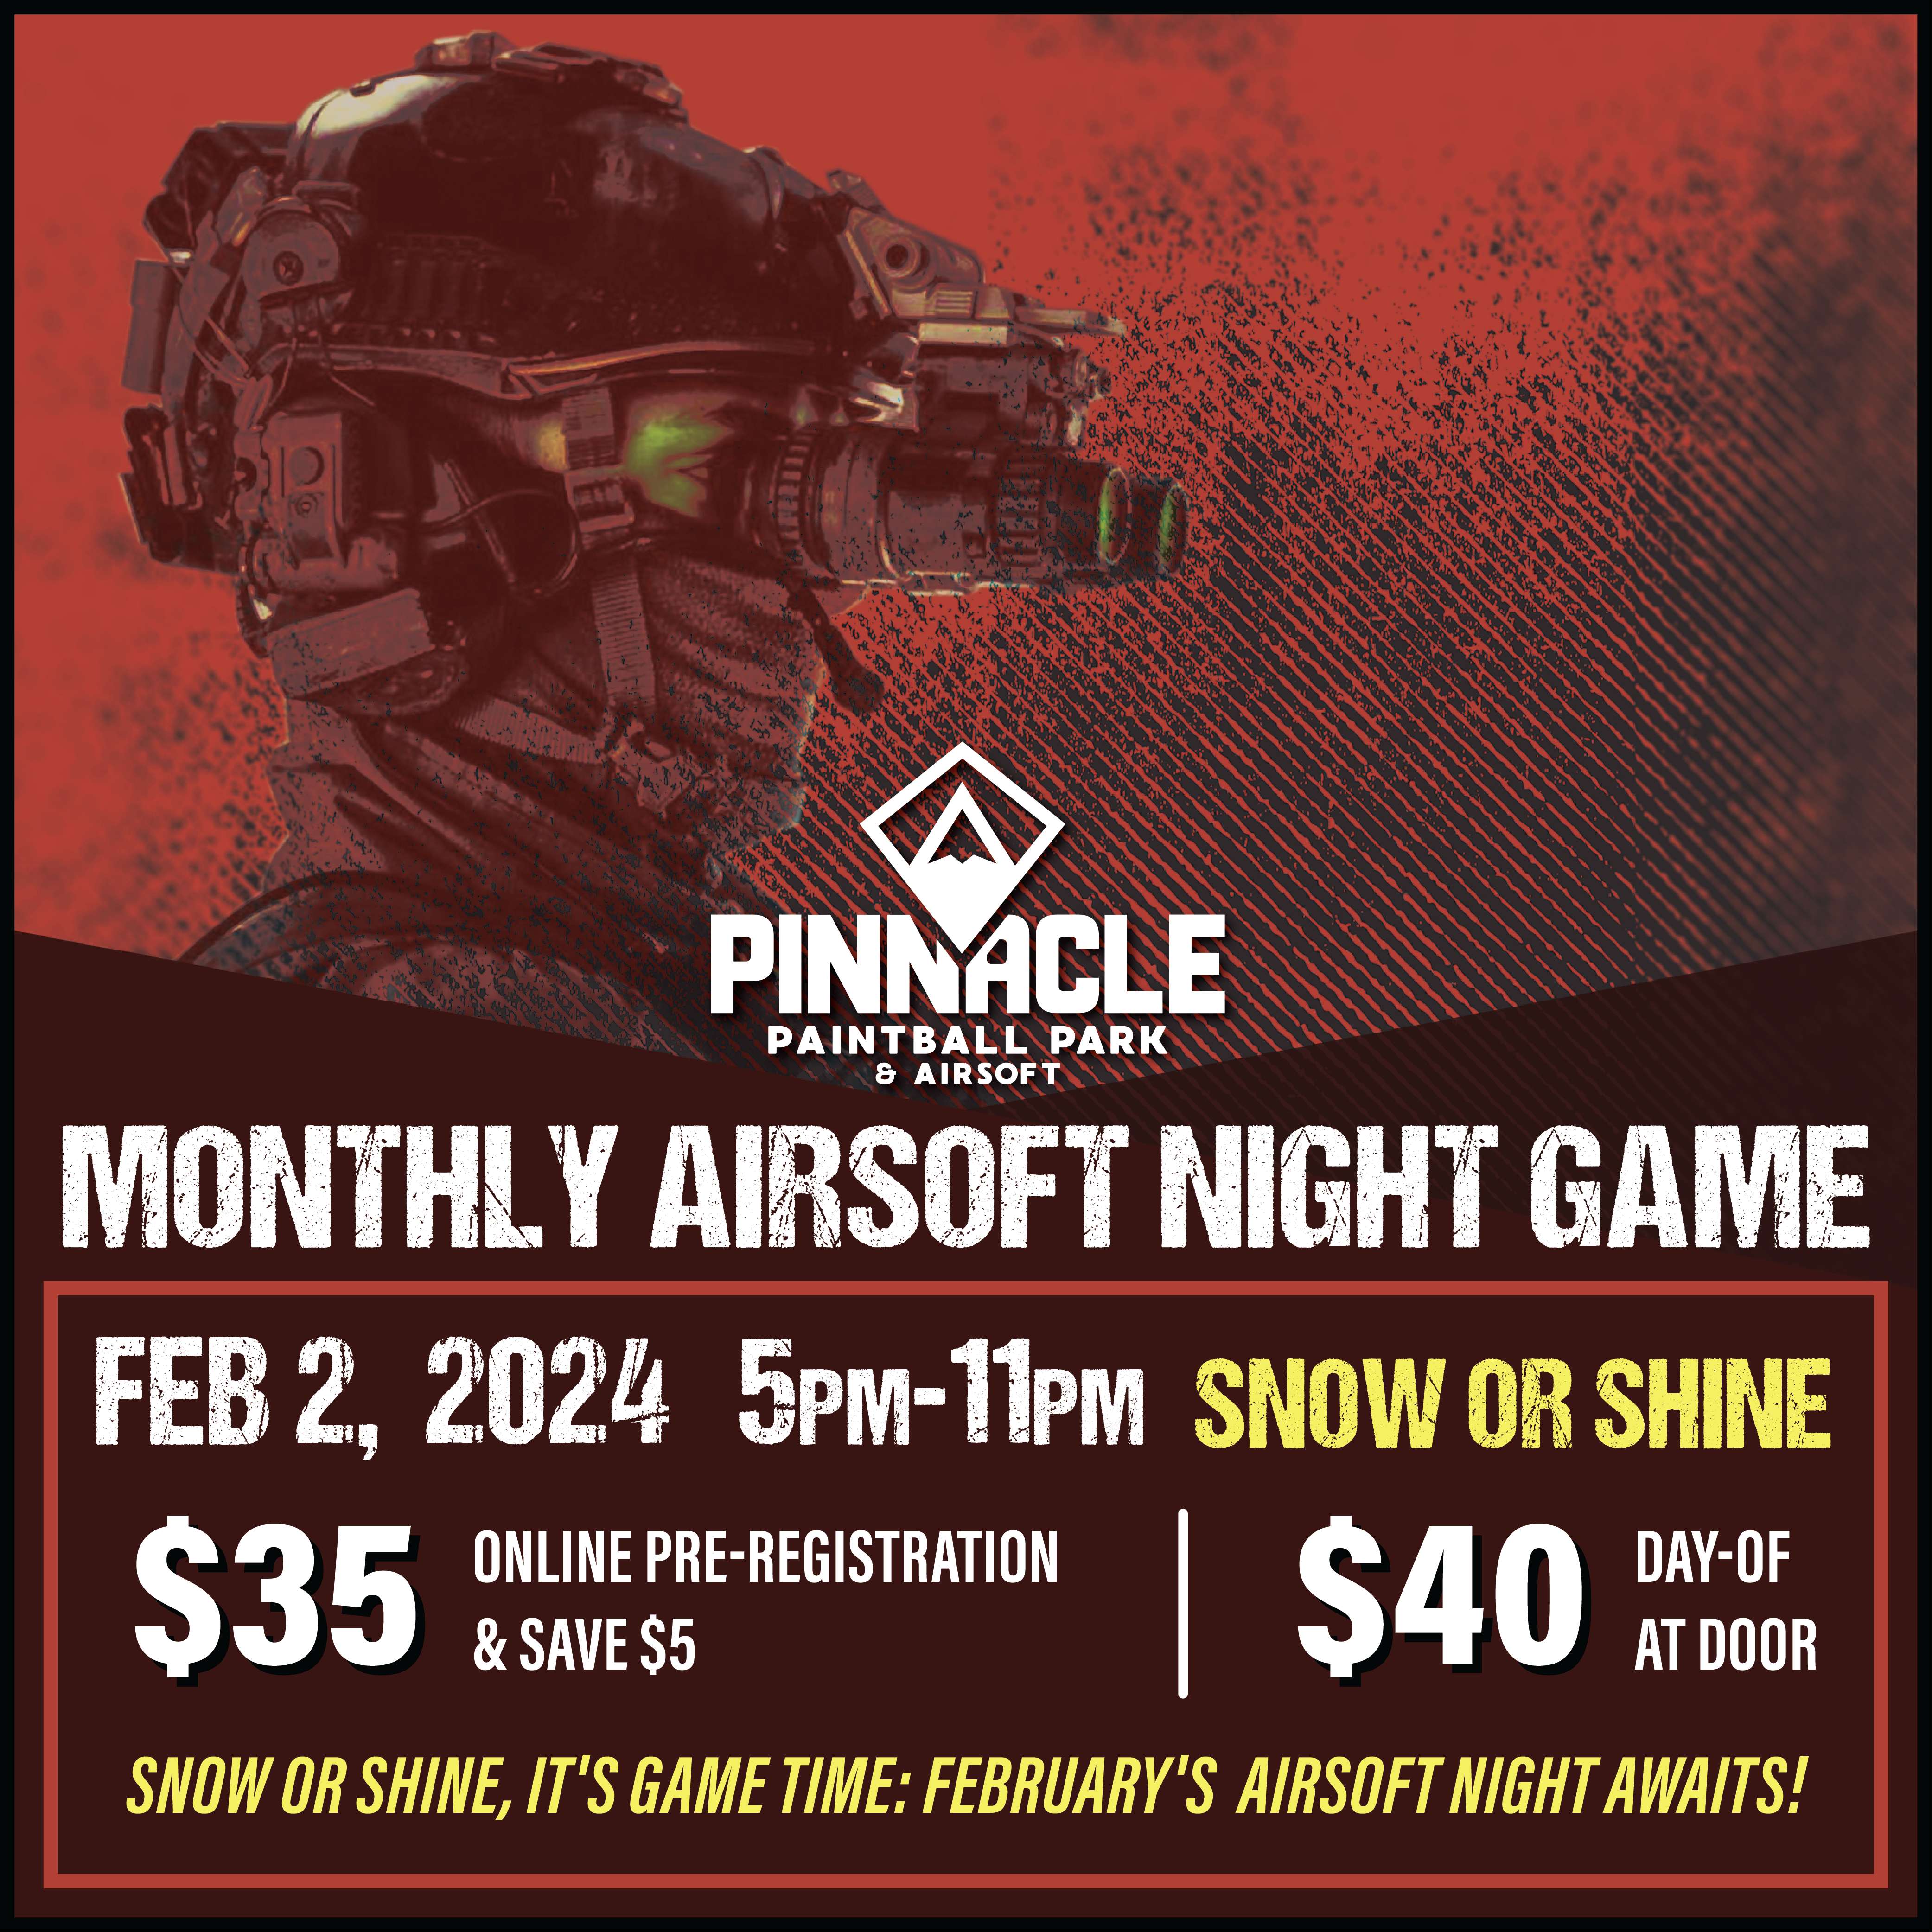 TICKET: Pinnacle Monthly Airsoft Night Game - February 2nd 5-11pm